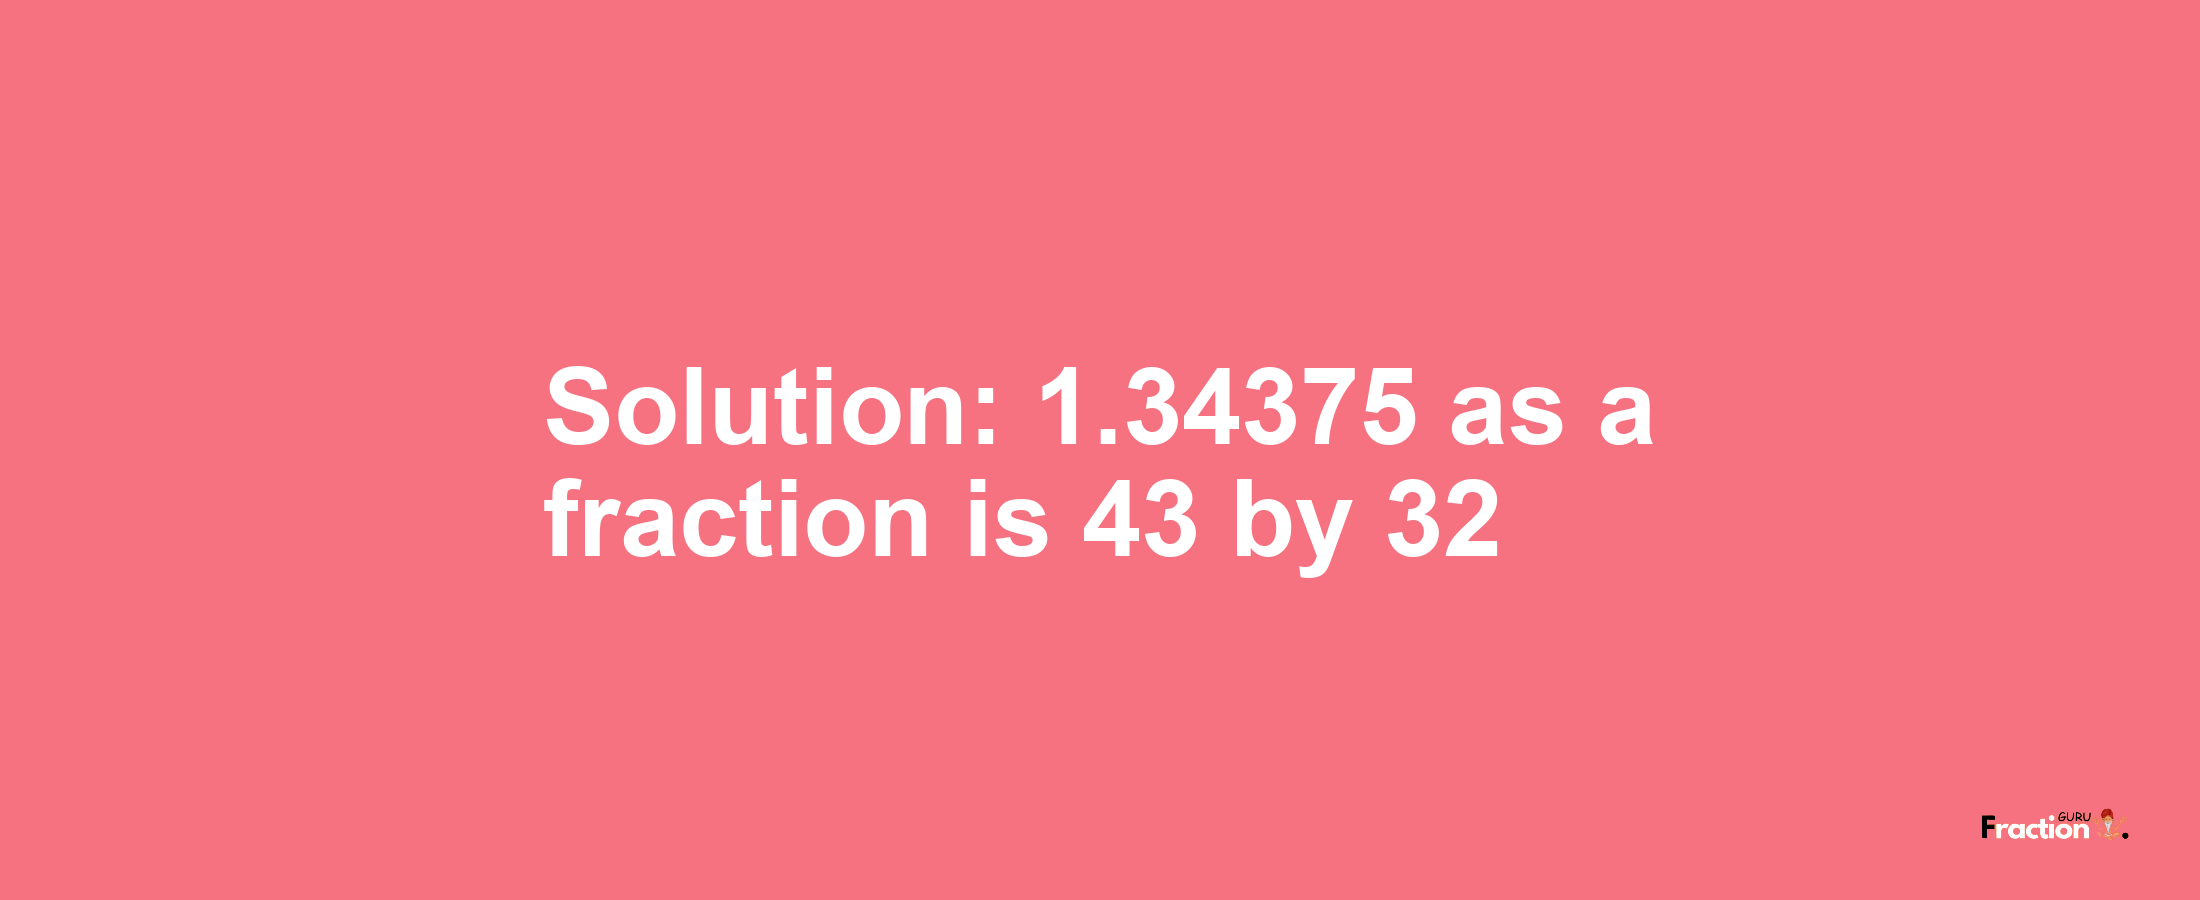 Solution:1.34375 as a fraction is 43/32